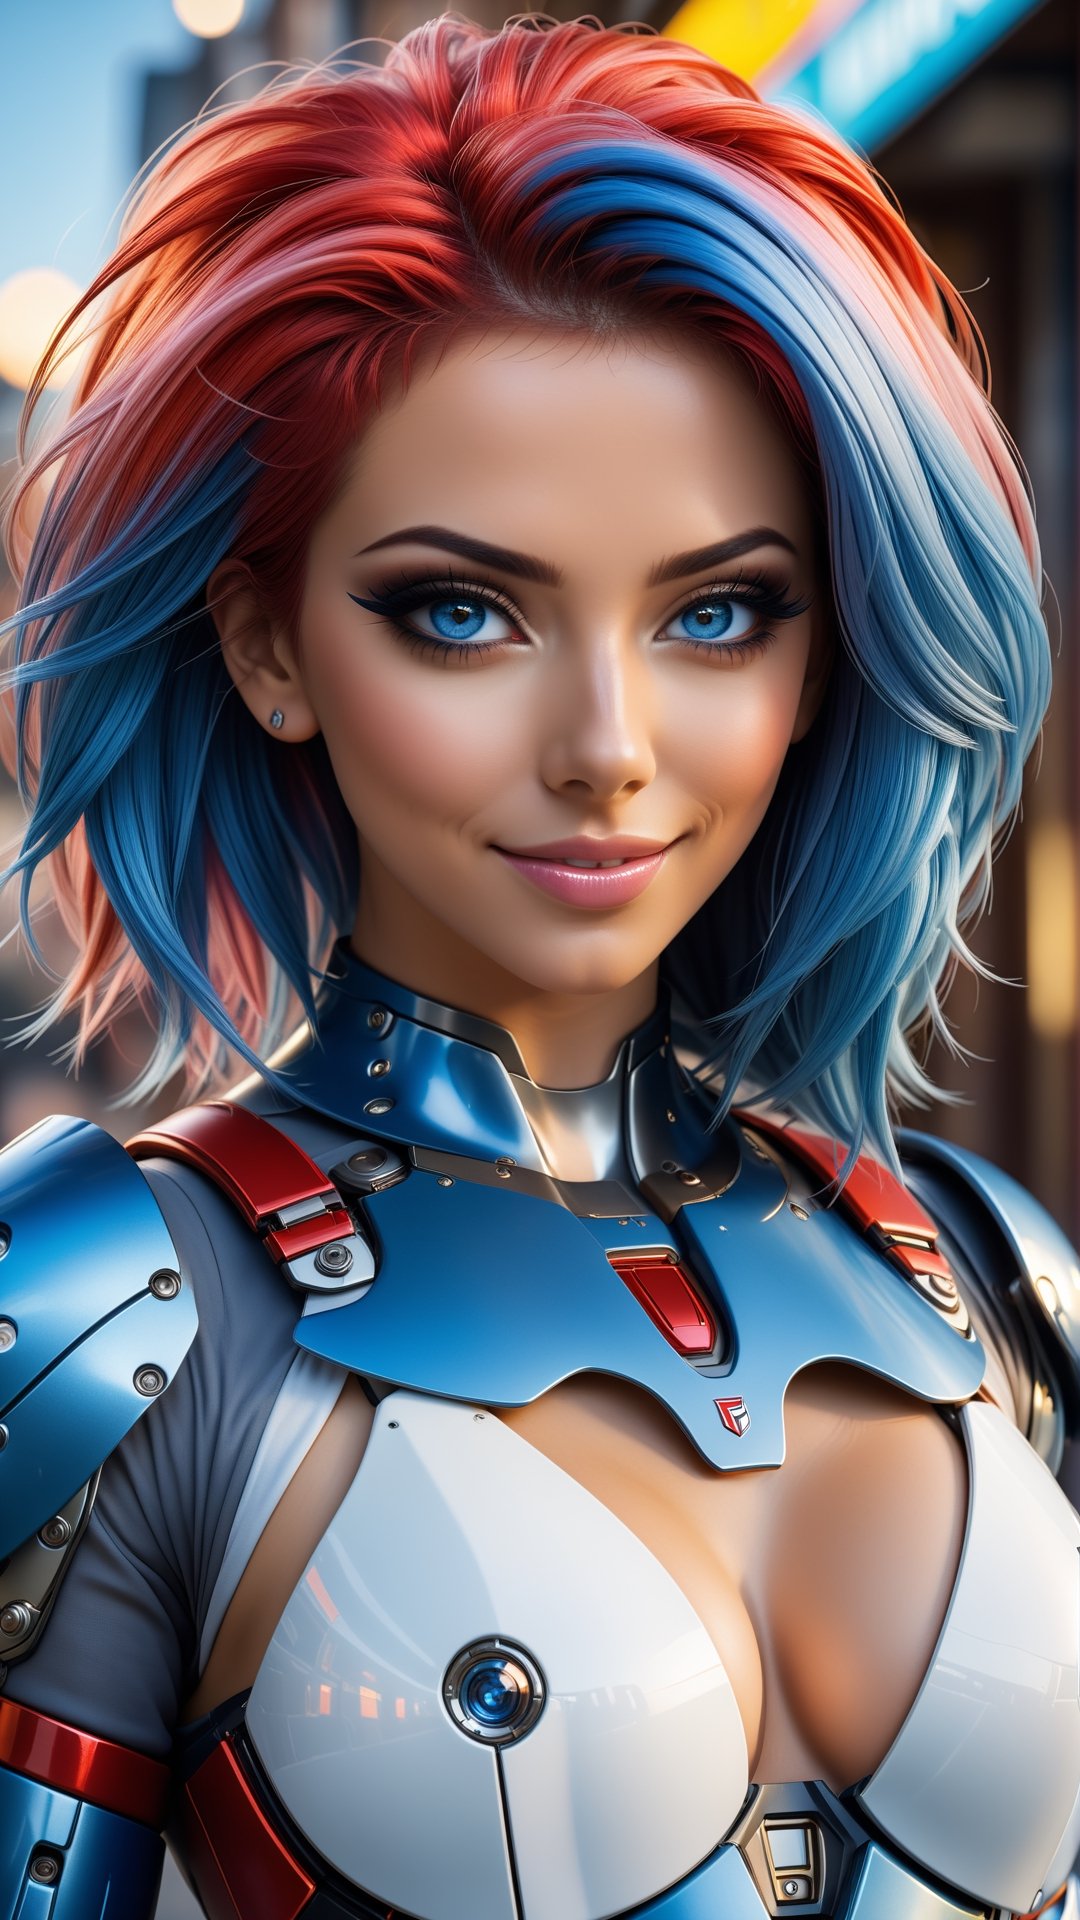 coco lovelock, pornstar, (athletic.1.3), nipples, breasts, medium breasts, (blue eyes, blush, smile, makeup, parted lips, red lips, eyeliner:1.5), (white and blue colors, ultimate mechanical armor:1.9), (full body, standing:1.5), from front, (multicolored_mohawk_hair_style, long crest:1.9), street background.

PNG image format, sharp lines and borders, solid blocks of colors, over 300ppp dots per inch, 32k ultra high definition, 530MP, Fujifilm XT3, cinematographic, (photorealistic:1.6), 4D, High definition RAW color professional photos, photo, masterpiece, realistic, ProRAW, realism, photorealism, high contrast, digital art trending on Artstation ultra high definition detailed realistic, detailed, skin texture, hyper detailed, realistic skin texture, facial features, armature, best quality, ultra high res, high resolution, detailed, raw photo, sharp re, lens rich colors hyper realistic lifelike texture dramatic lighting unrealengine trending, ultra sharp, pictorial technique, (sharpness, definition and photographic precision), (contrast, depth and harmonious light details), (features, proportions, colors and textures at their highest degree of realism), (blur background, clean and uncluttered visual aesthetics, sense of depth and dimension, professional and polished look of the image), work of beauty and complexity. perfectly symmetrical body.

(aesthetic + beautiful + harmonic:1.5), (ultra detailed face, ultra detailed eyes, ultra detailed mouth, ultra detailed body, ultra detailed hands, ultra detailed clothes, ultra detailed background, ultra detailed scenery:1.5),

3d_toon_xl:0.8, JuggerCineXL2:0.9, detail_master_XL:0.9, detailmaster2.0:0.9, perfecteyes-000007:1.3,more detail XL